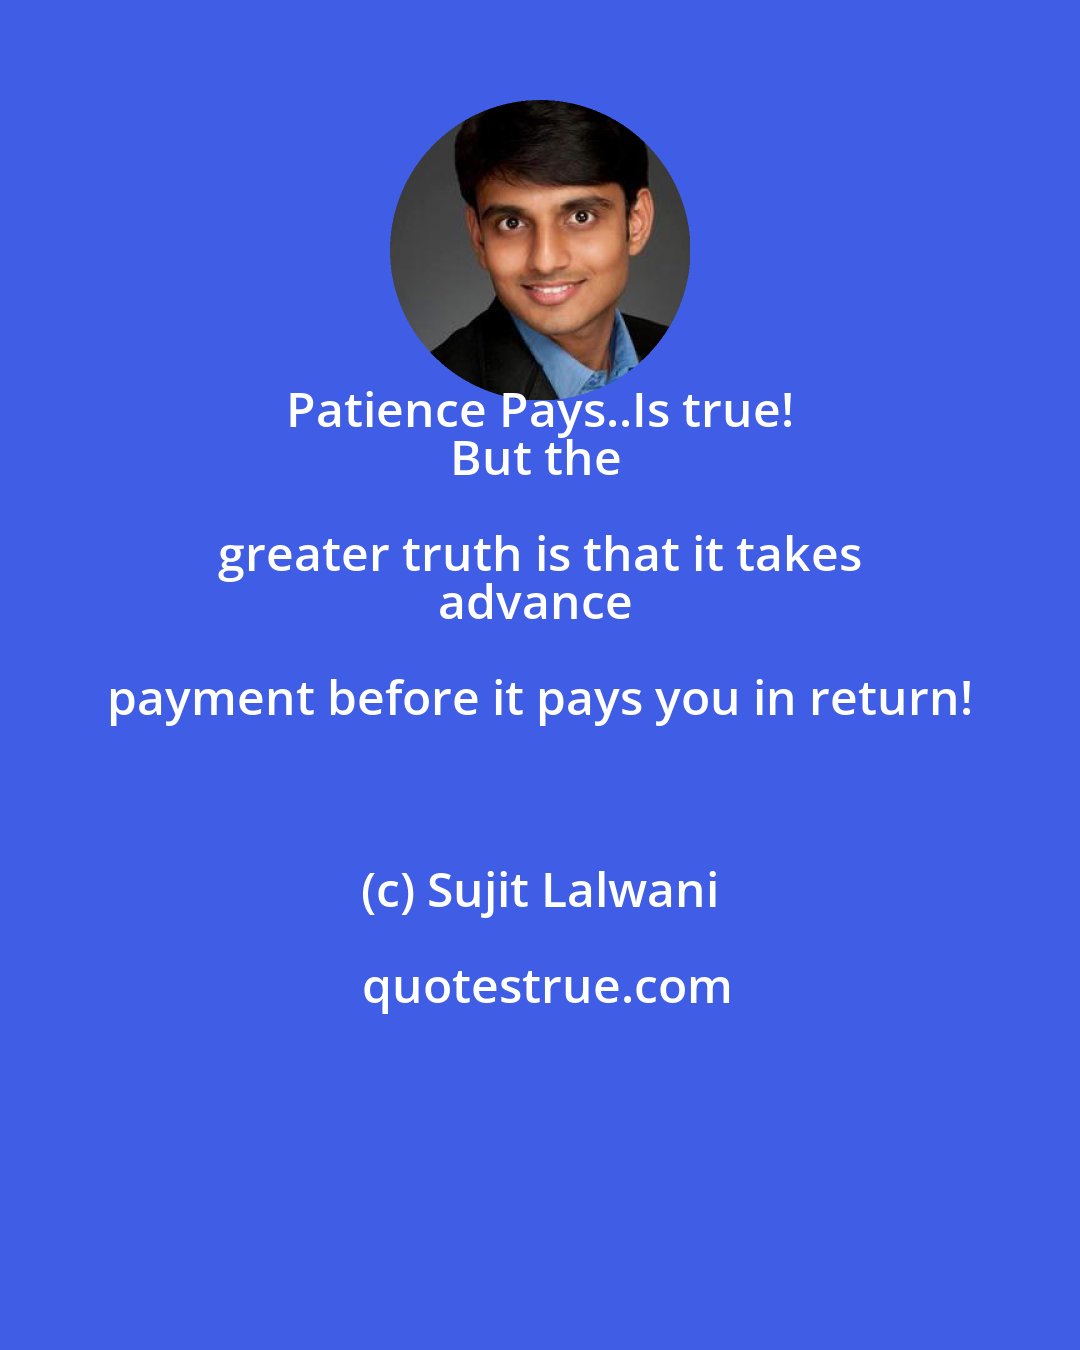 Sujit Lalwani: Patience Pays..Is true! 
But the greater truth is that it takes 
advance payment before it pays you in return!